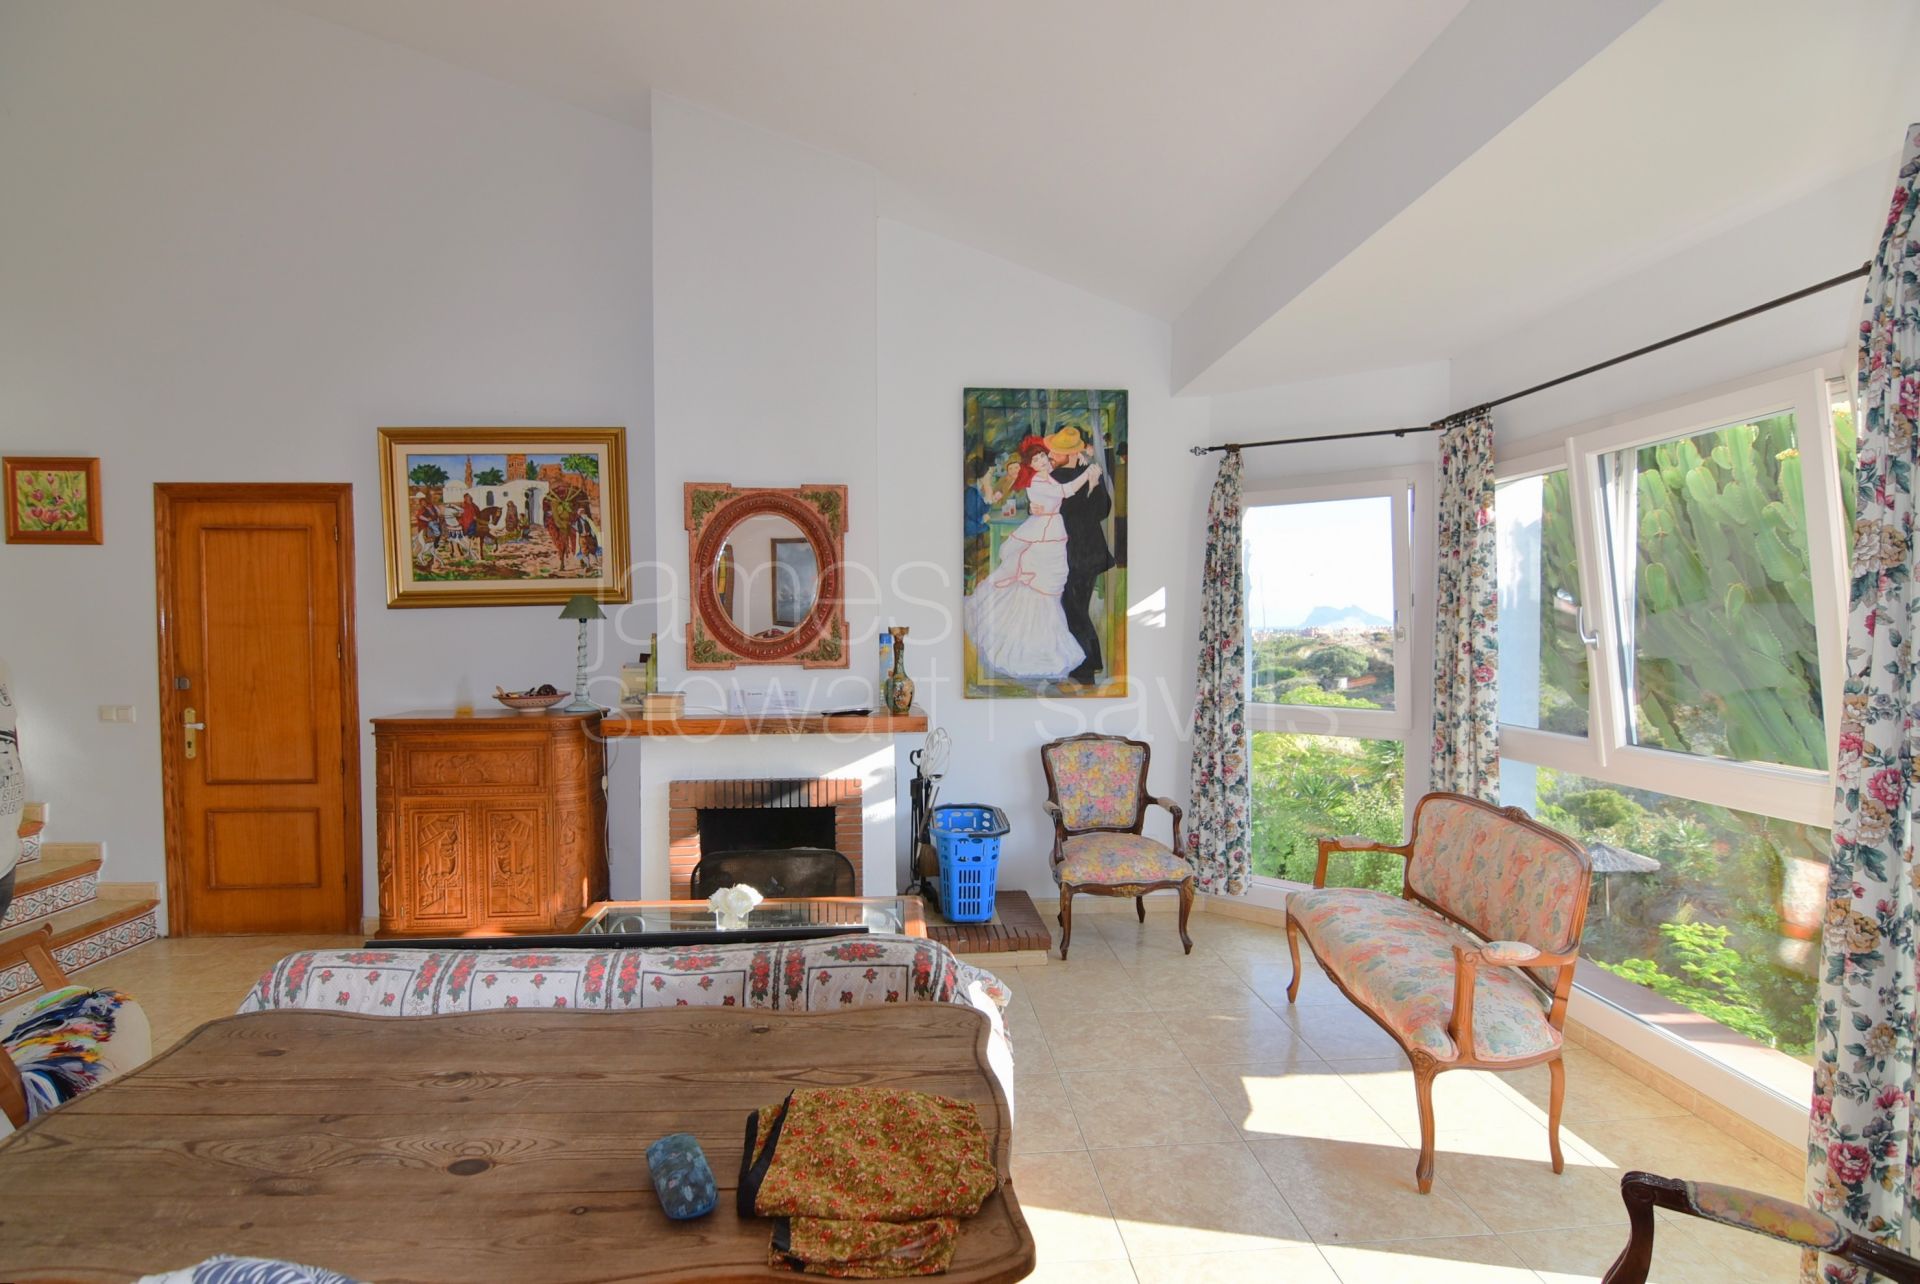 Semi- detached house in a quiet area near Torreguadiaro Beach: An Ideal Family Home